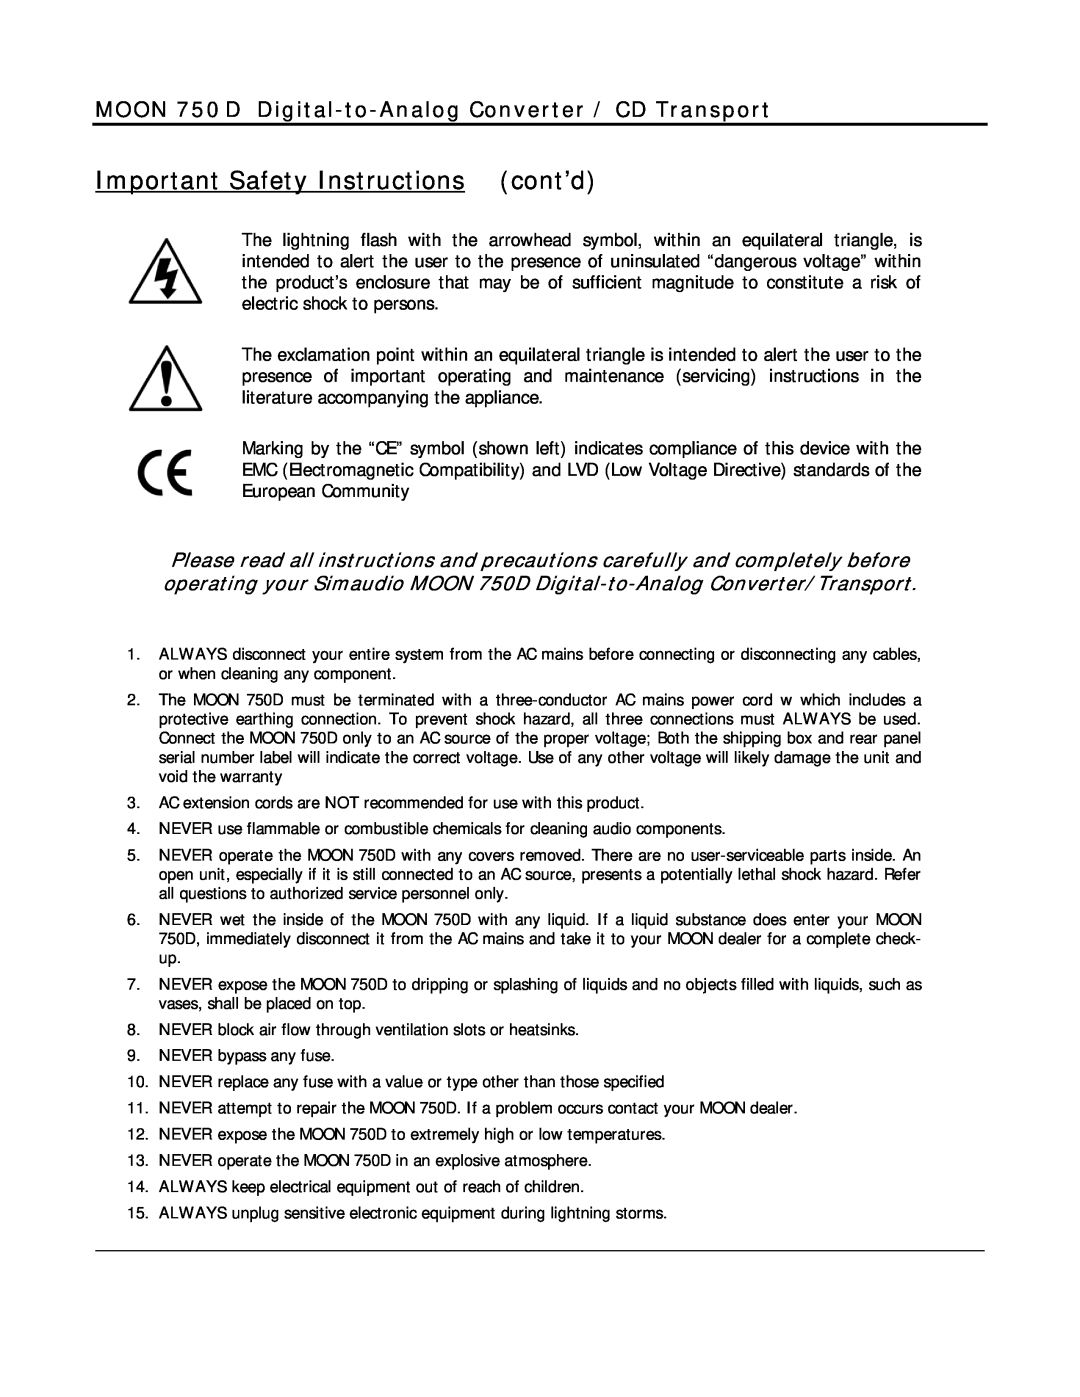 Simaudio owner manual Important Safety Instructions cont’d, MOON 750 D Digital-to-Analog Converter / CD Transport 